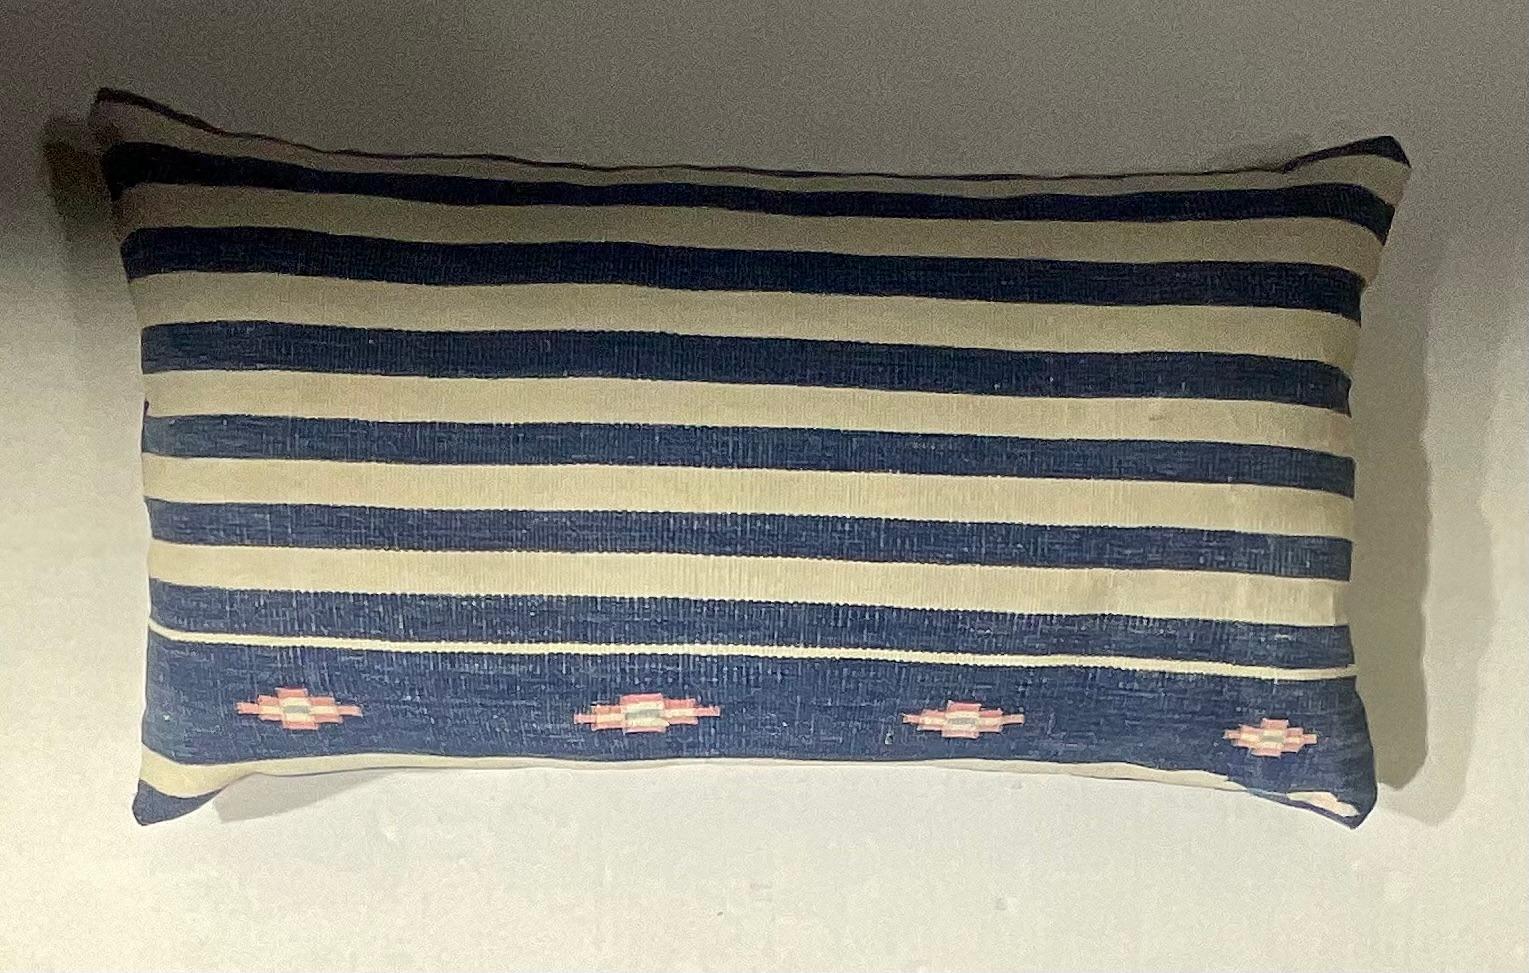 Beautiful pillow made of handwoven flat-weave antique Indian Durie textile on both side ,with indigo pink and cream  colors of geometric motifs 
fresh new insert.
The textile was professionally clean before become a pillow.